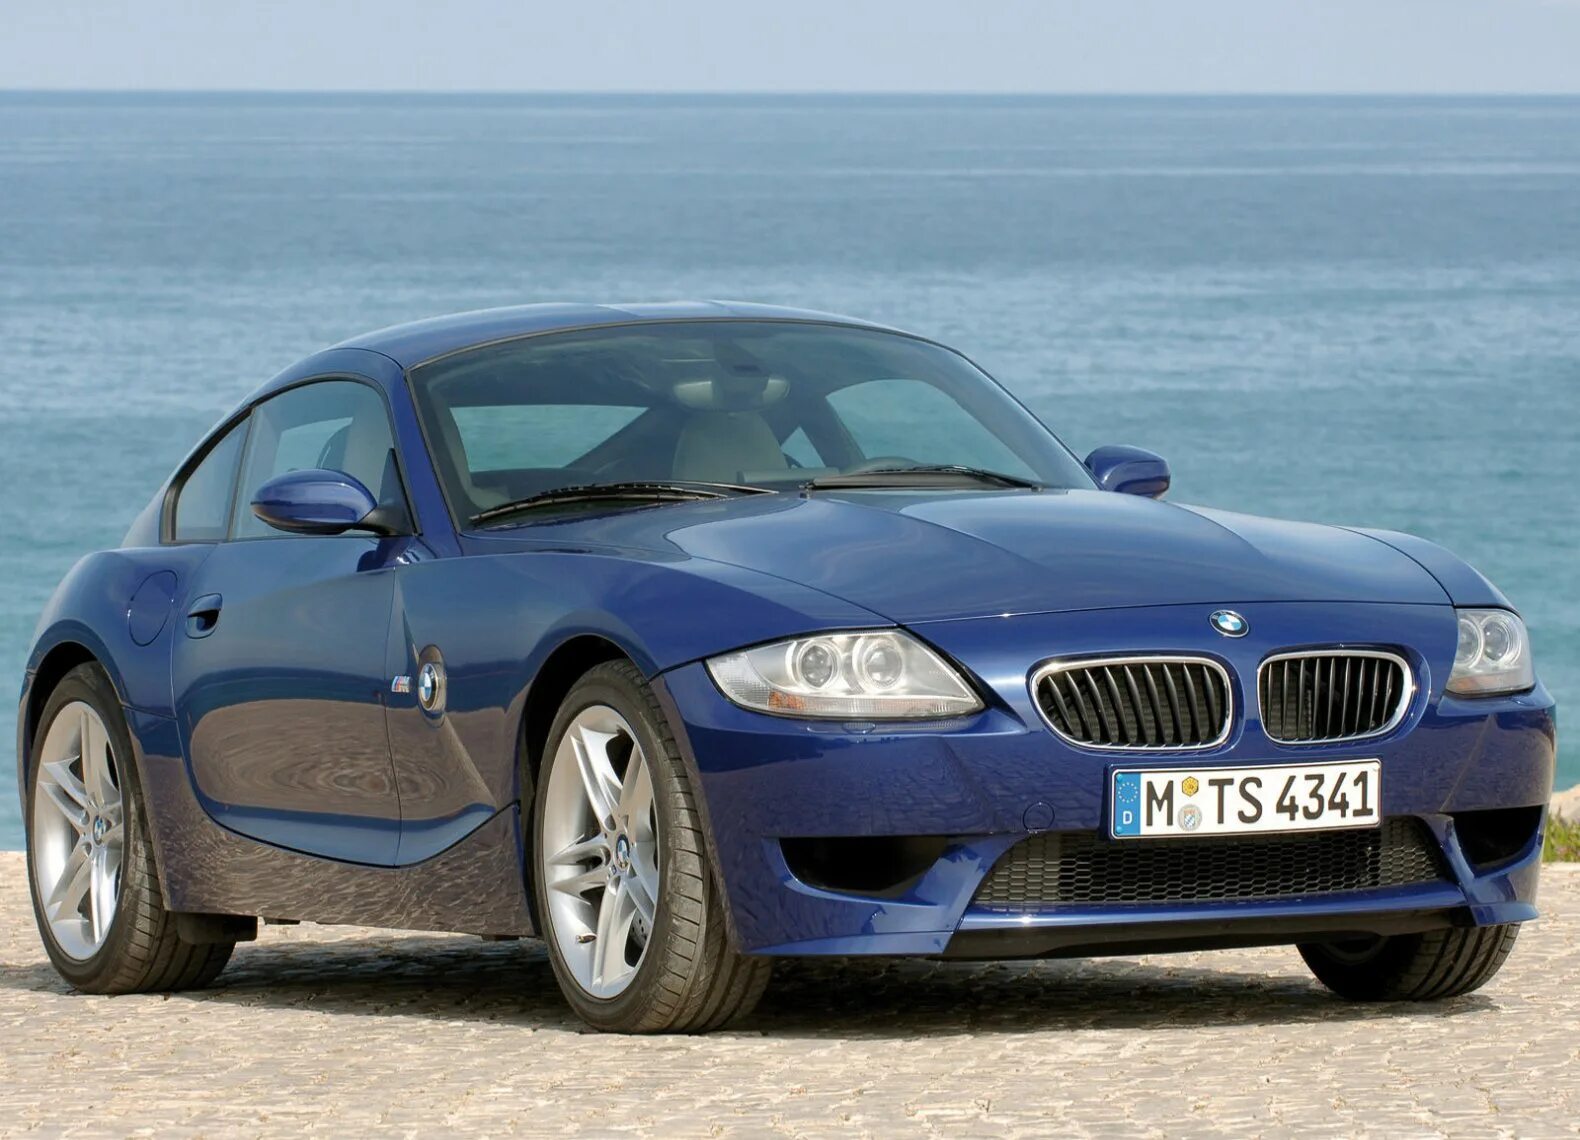 BMW z4 Coupe. BMW z4 m Coupe. BMW z4m Coupe e86. 2008 BMW z4 m Coupe.